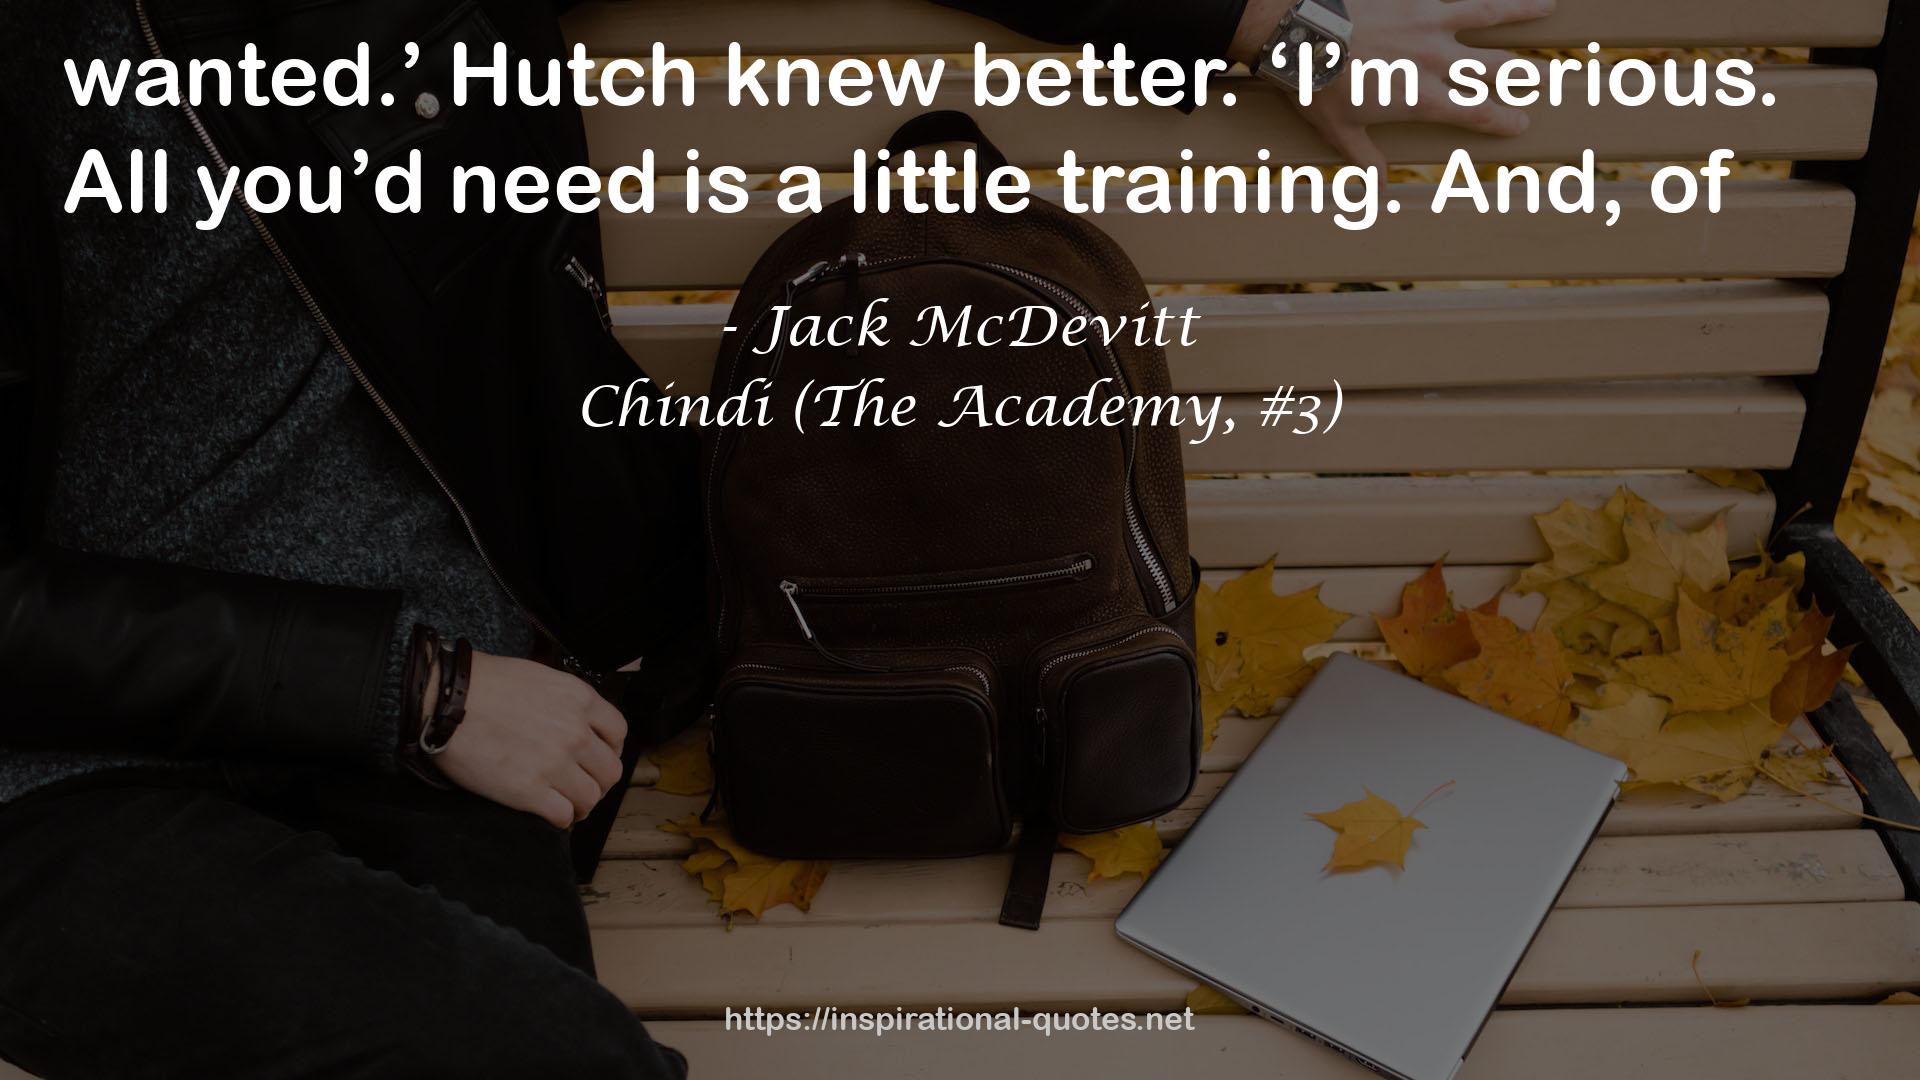 Chindi (The Academy, #3) QUOTES